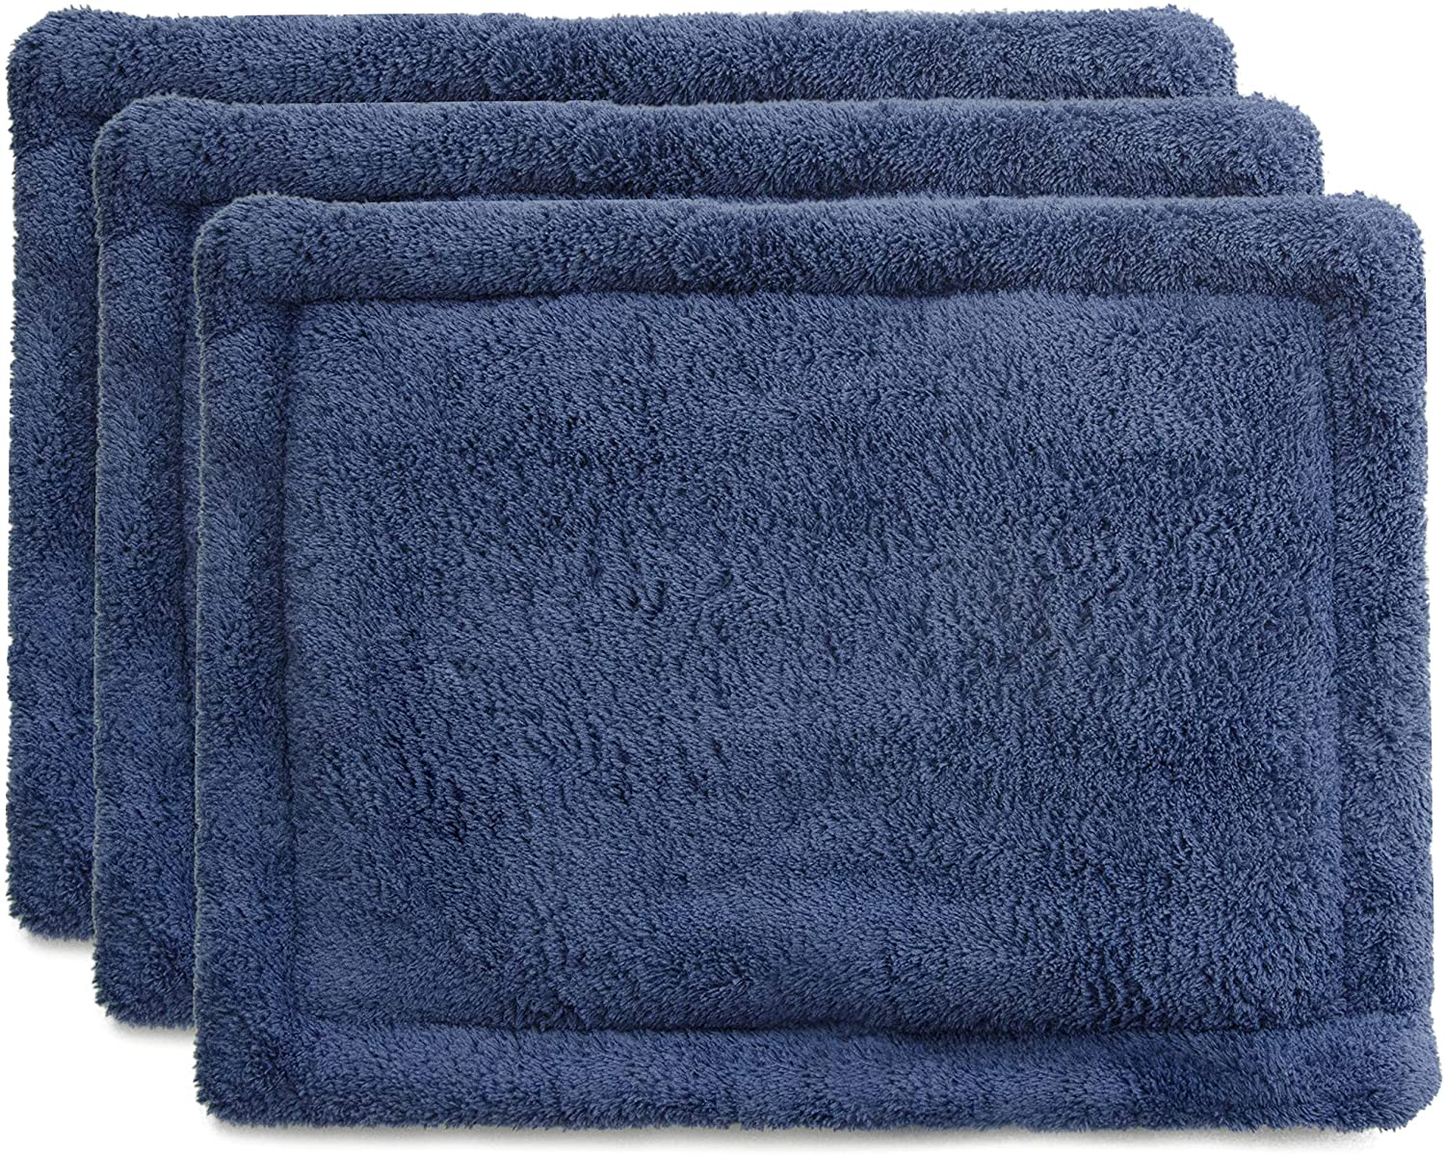 Tierecare Guinea Pig Cage Liner Fleece Bedding Super Absorbent Cage Liners Waterproof&Washable Guinea Pig Pee Pads for Small Animal Rabbit Reusable Animals & Pet Supplies > Pet Supplies > Small Animal Supplies > Small Animal Bedding Tierecare Navy Blue  